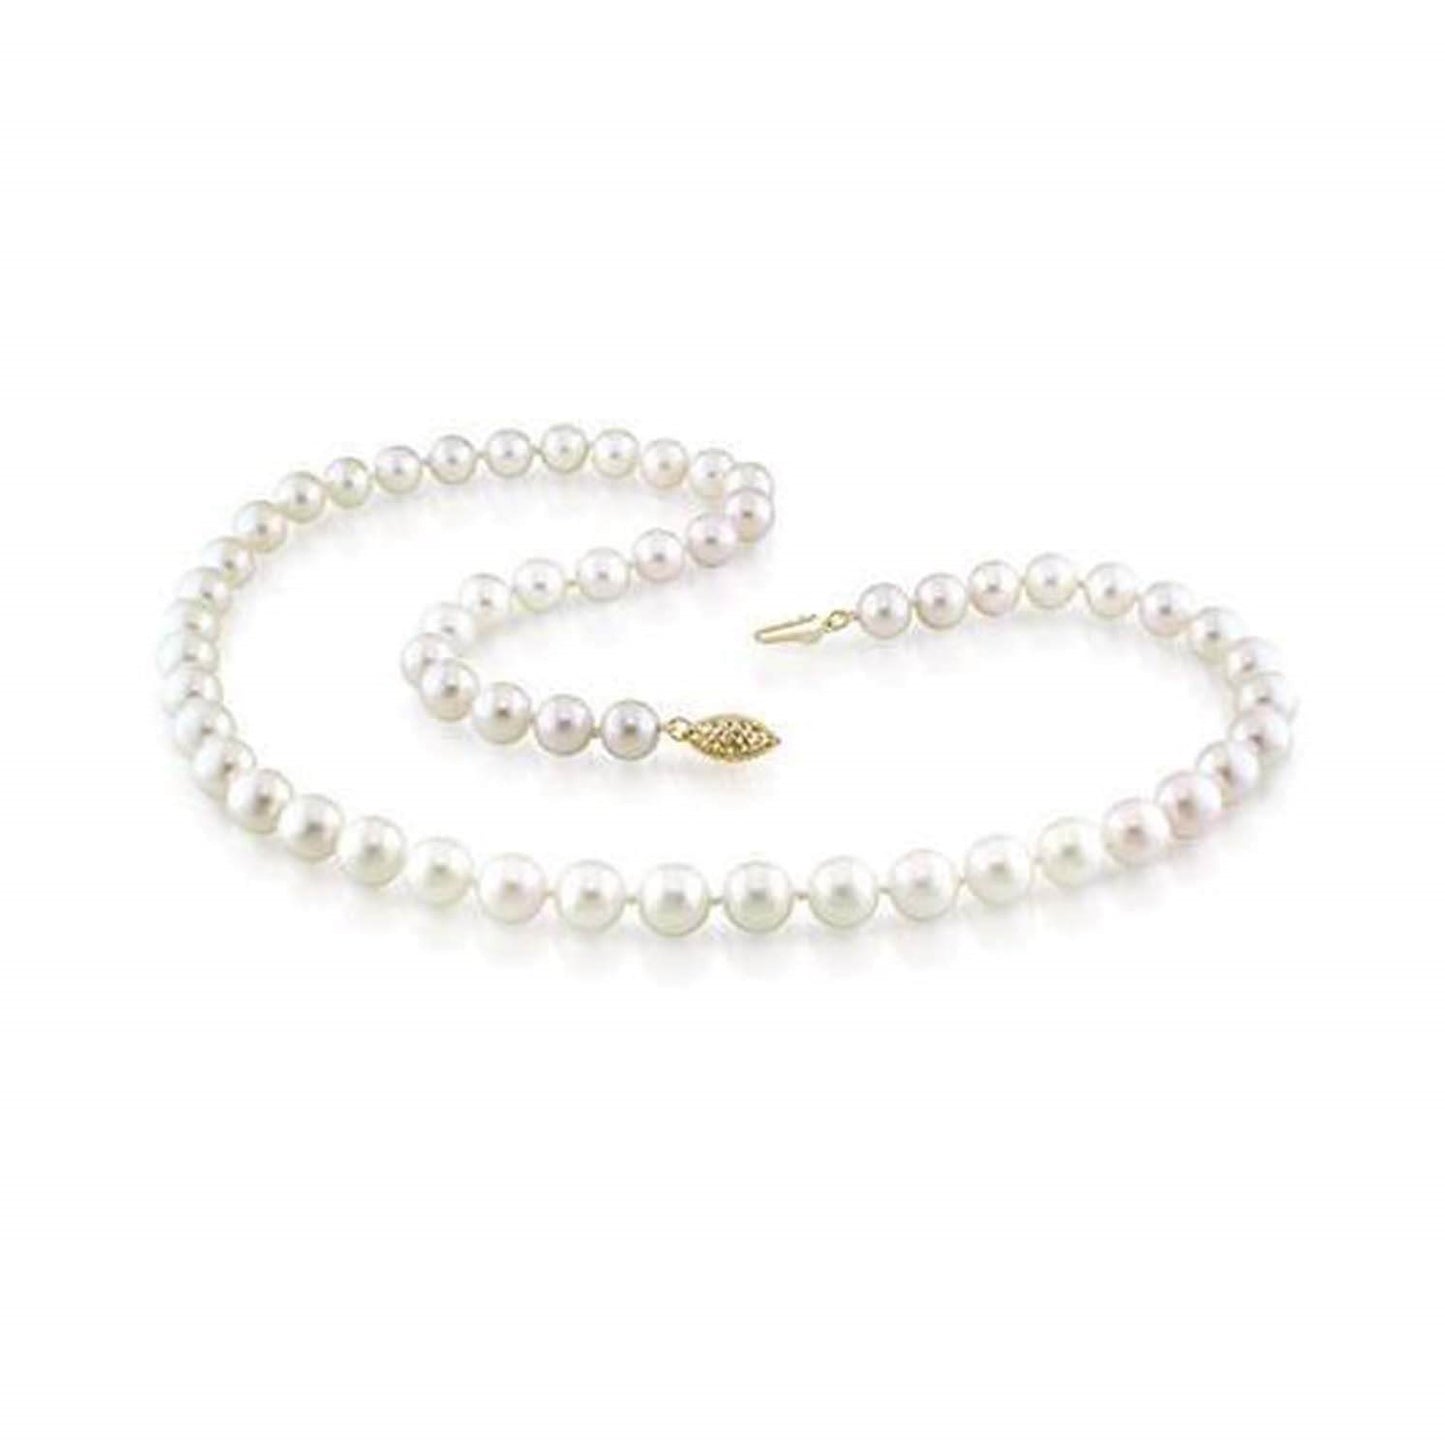 14k Yellow Gold White Freshwater Pearl Strand Necklace 18"